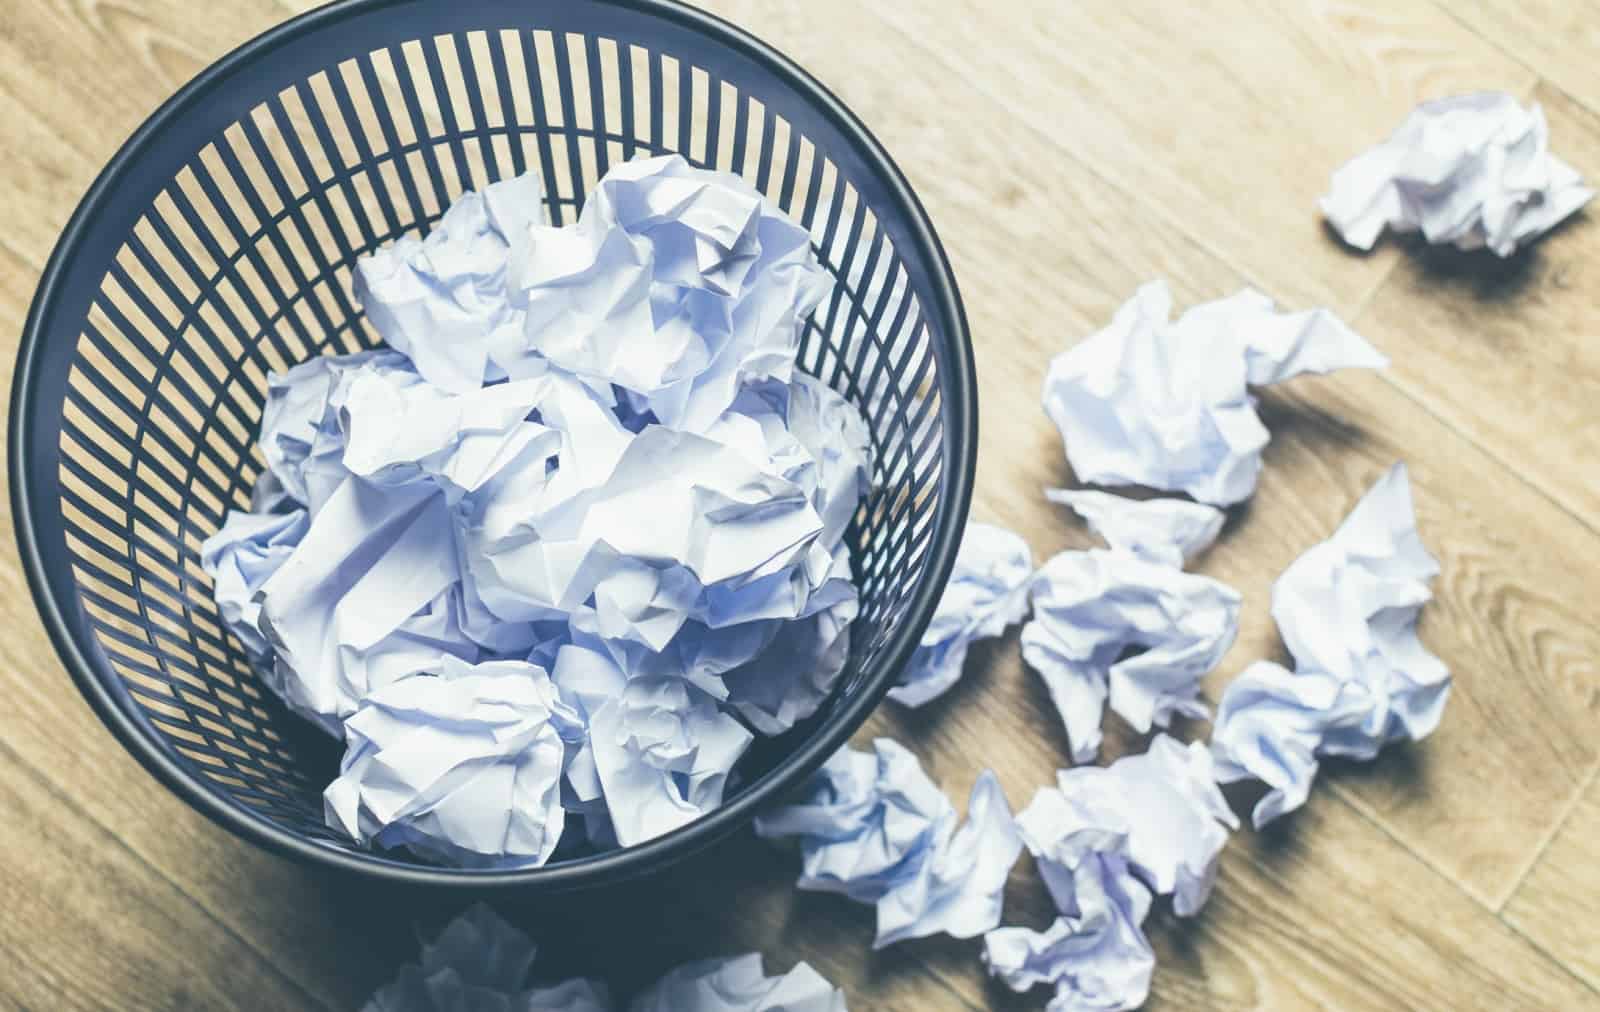 How To Manage Paper Waste?